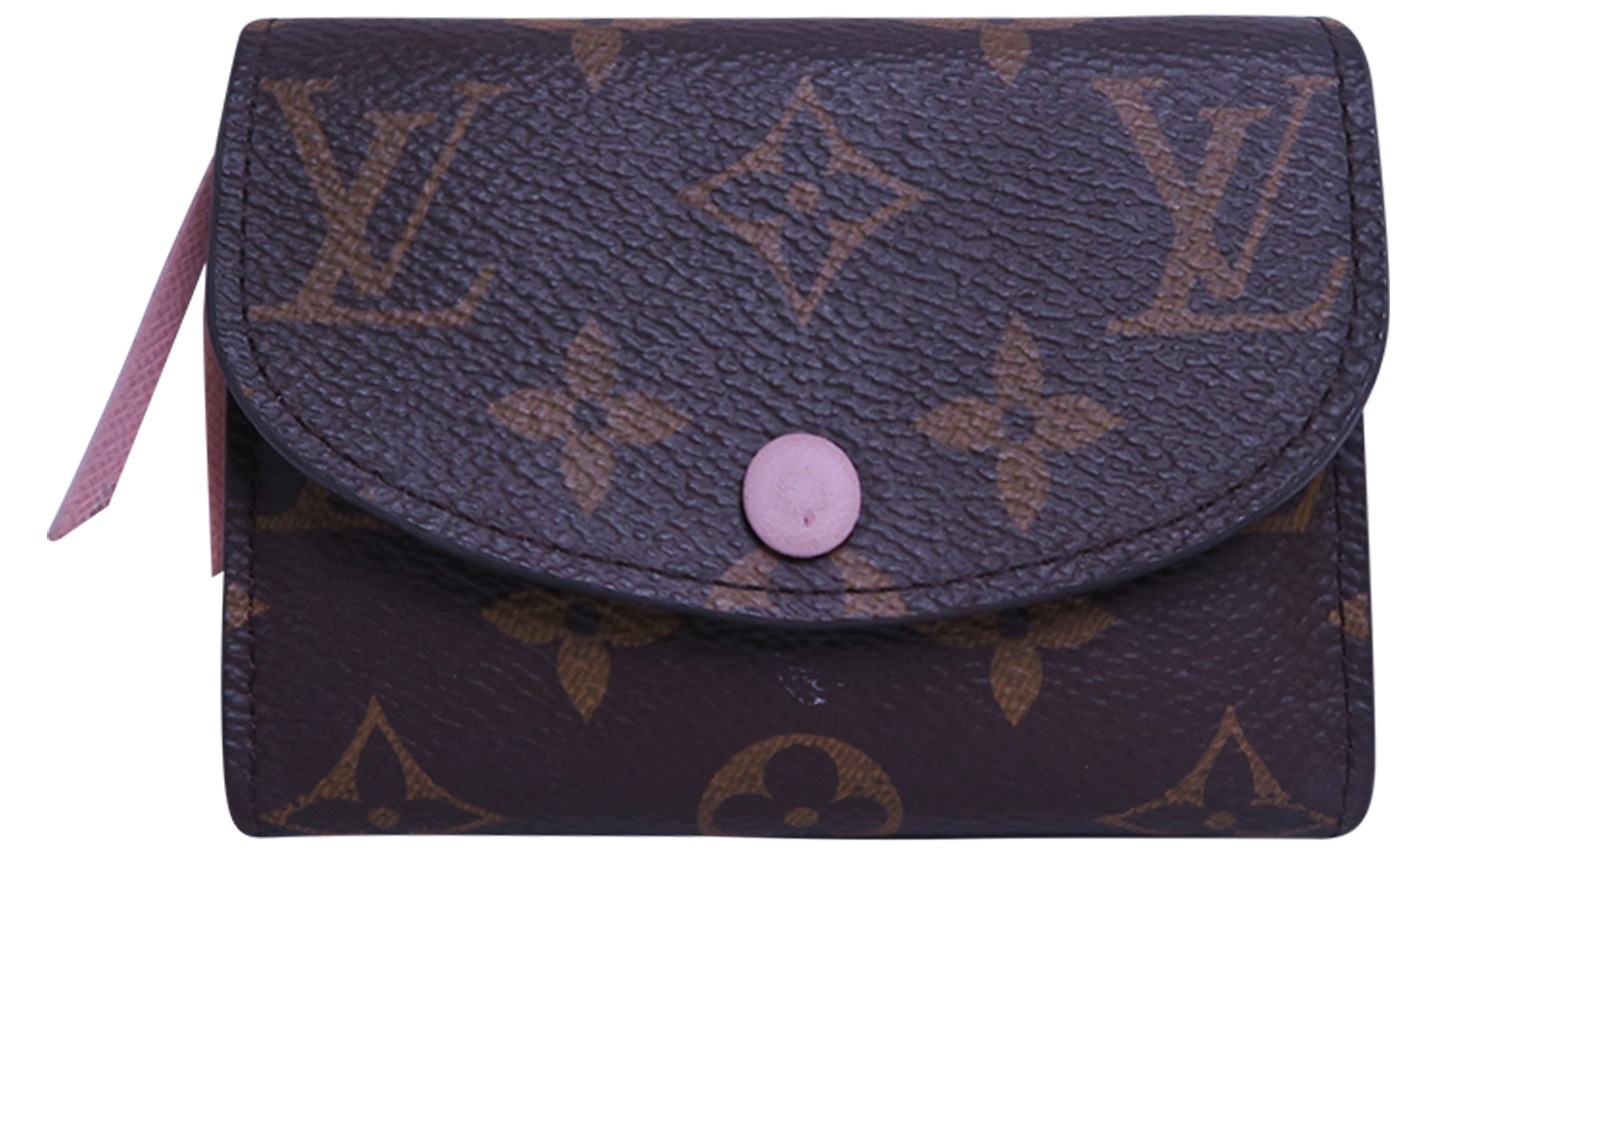 Rosalie Coin Purse Monogram Canvas in WOMEN's SMALL LEATHER GOODS WALLETS  collections by Louis Vuitton